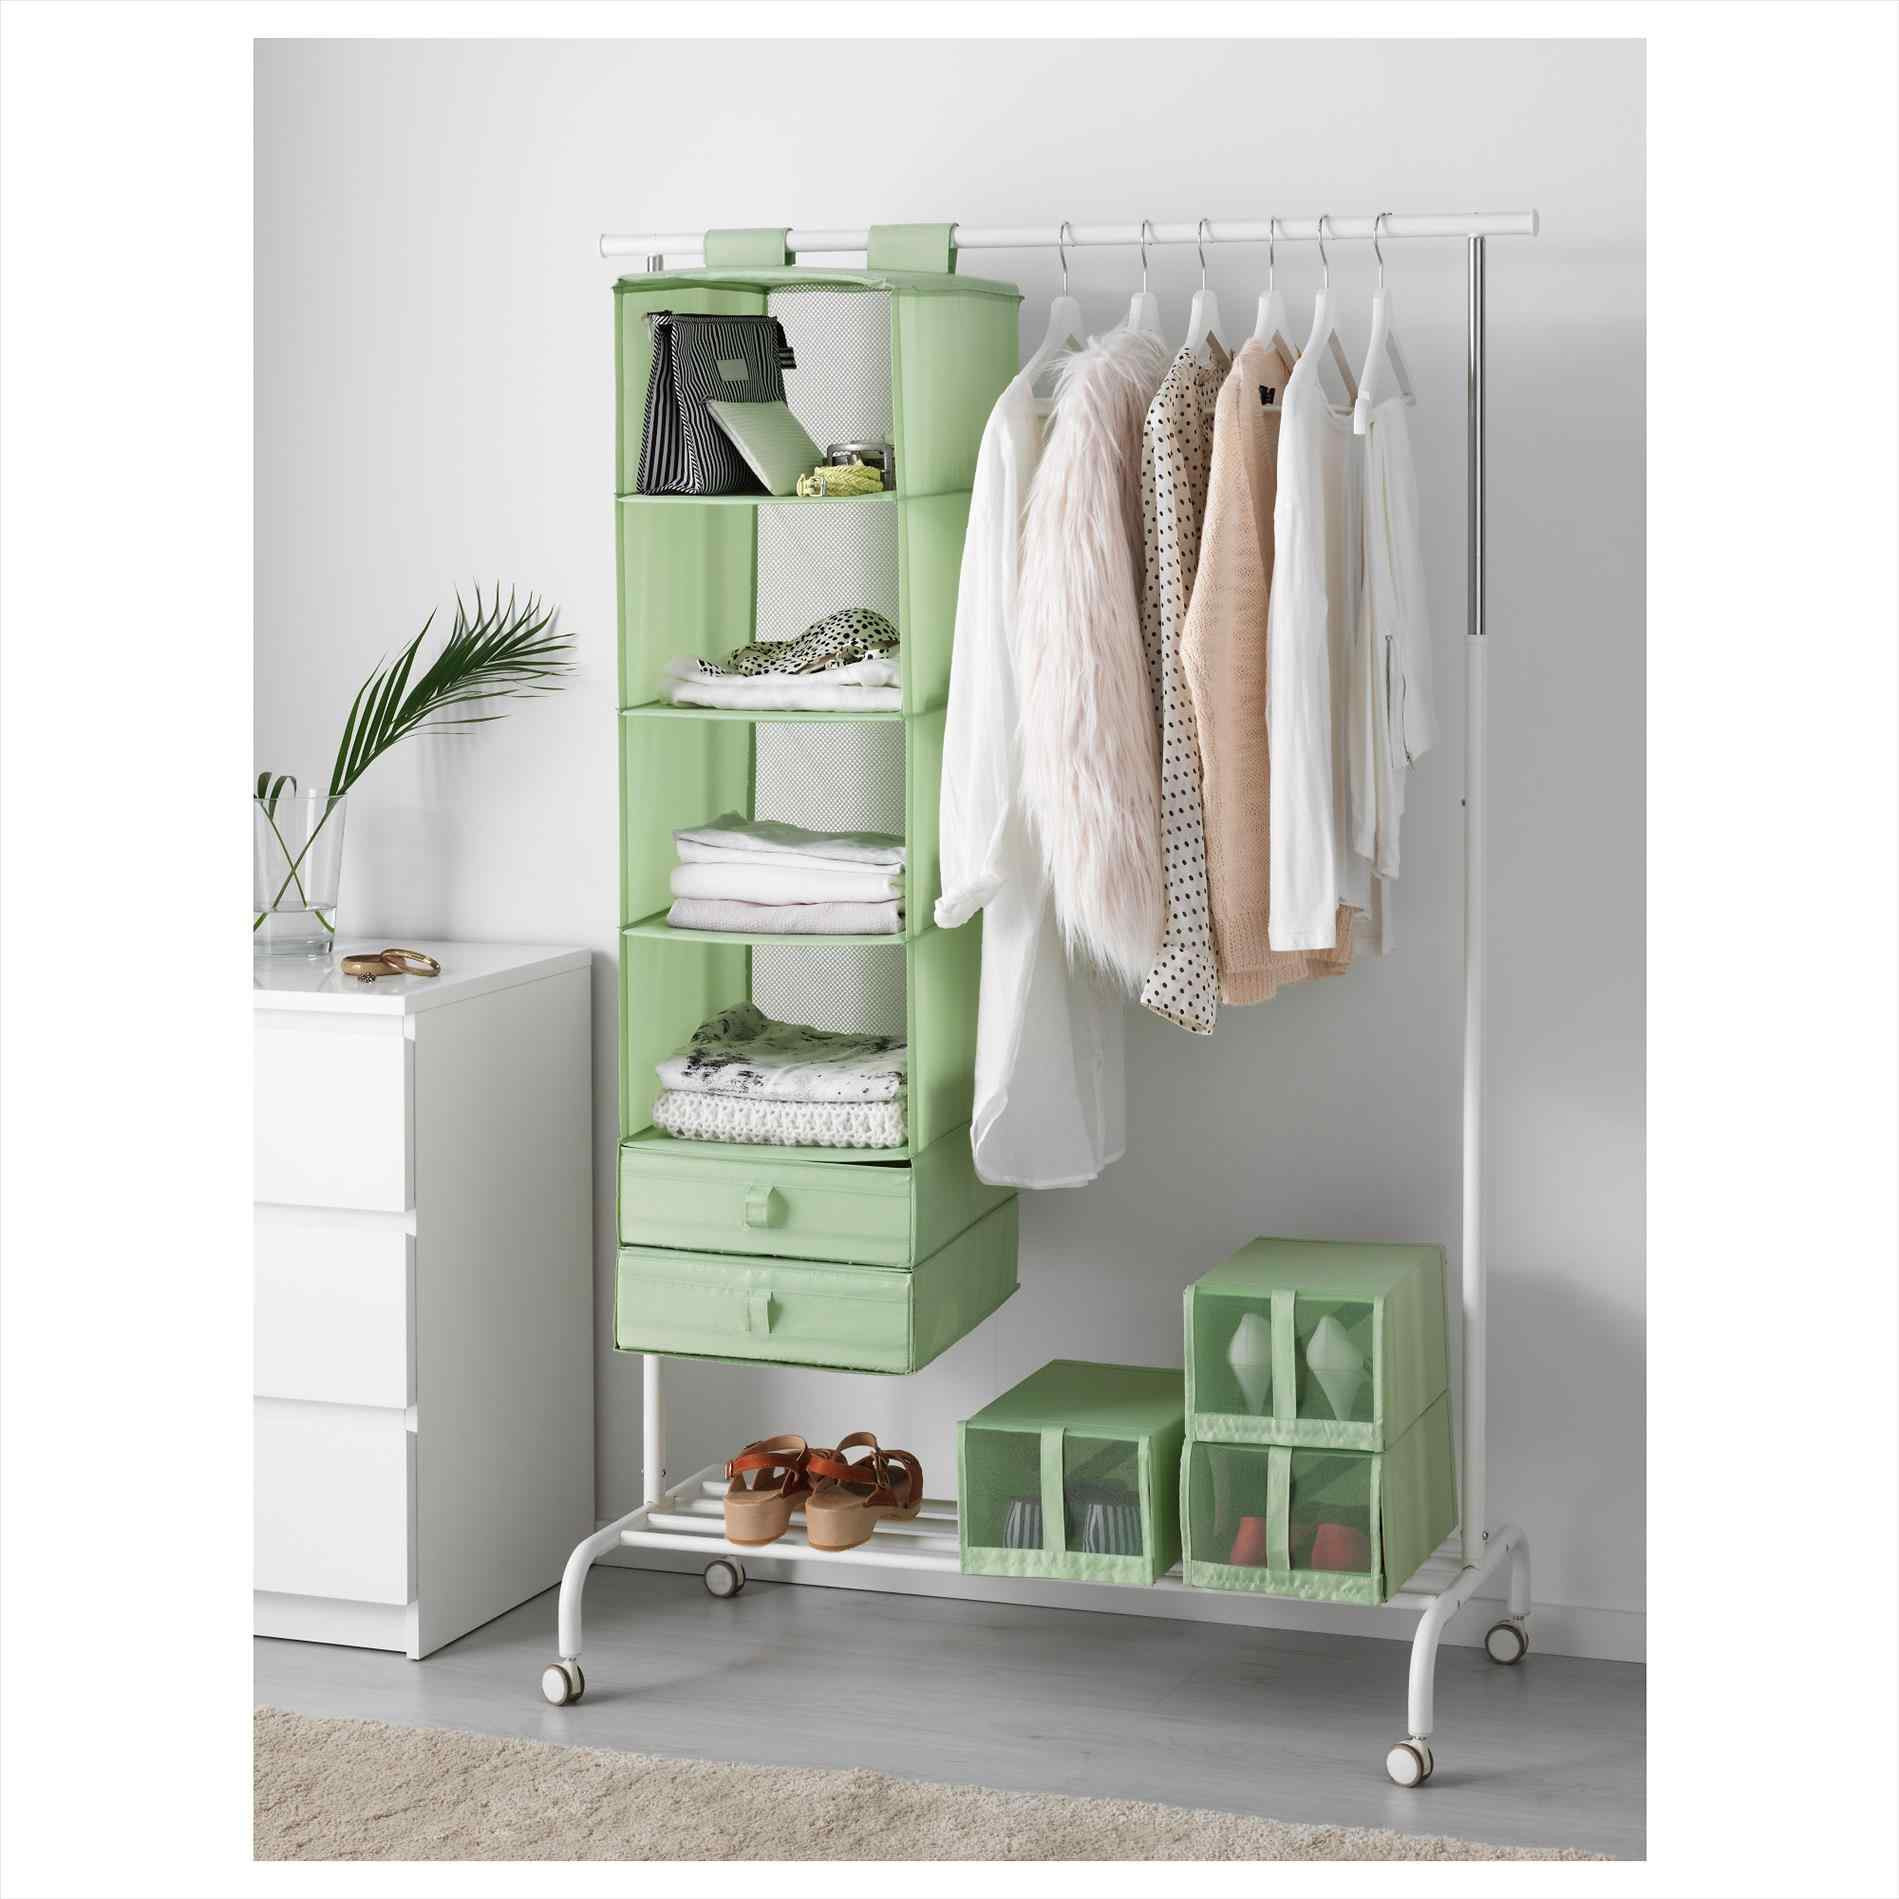 Clothes Storage Ideas For Bedroom
 Clothes Storage Ideas For Small Spaces